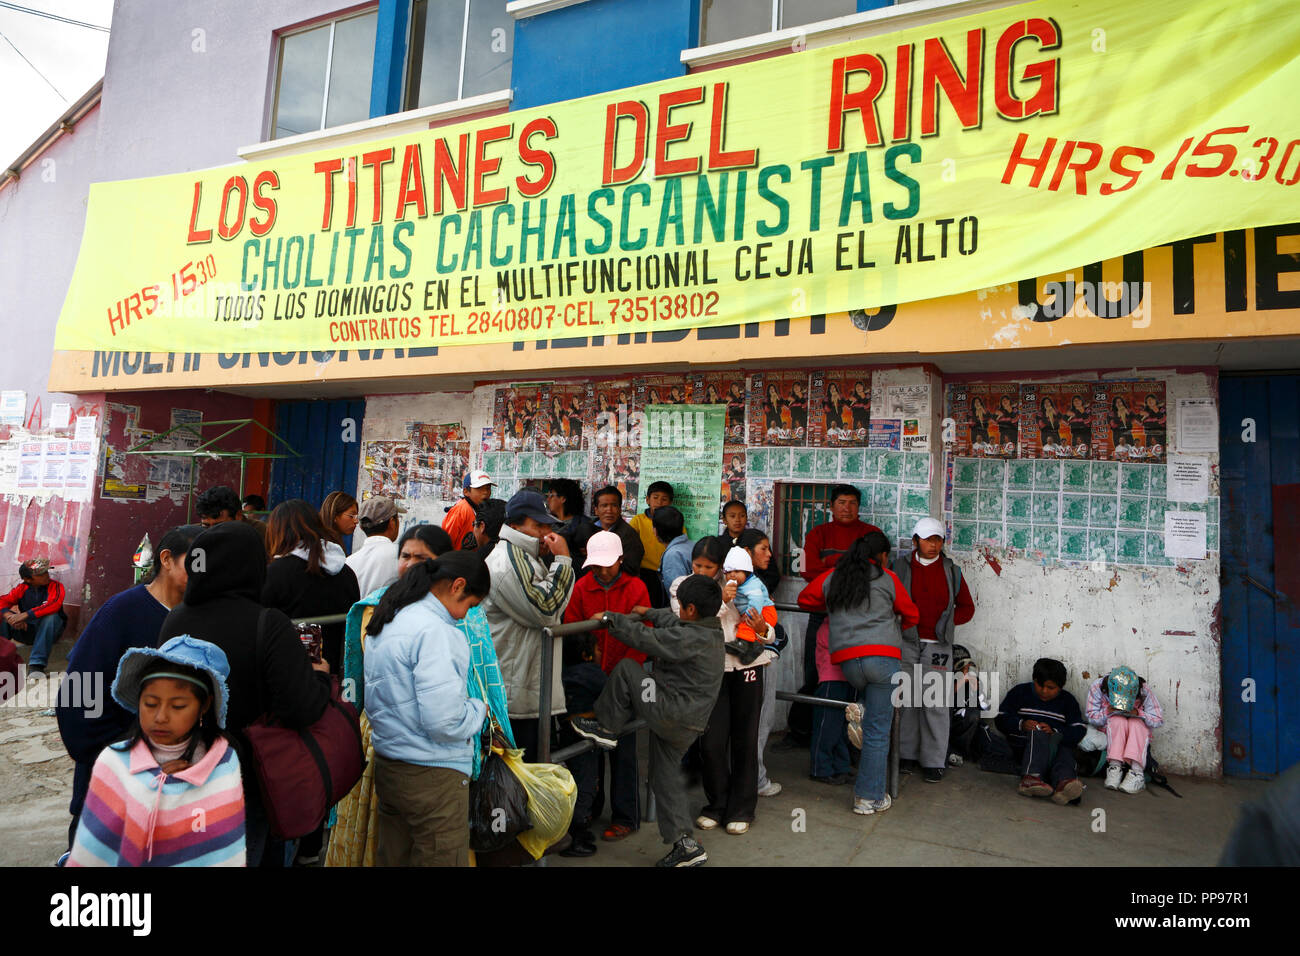 Waiting spectators in front of the multi-purpose sports hall Anden Secrets at the Plaza San Pedro in El Alto, above Bolivia's capital La Paz, where on every Sunday afternoon the Catching takes place with the main absorption the Cholitas wrestling. Stock Photo